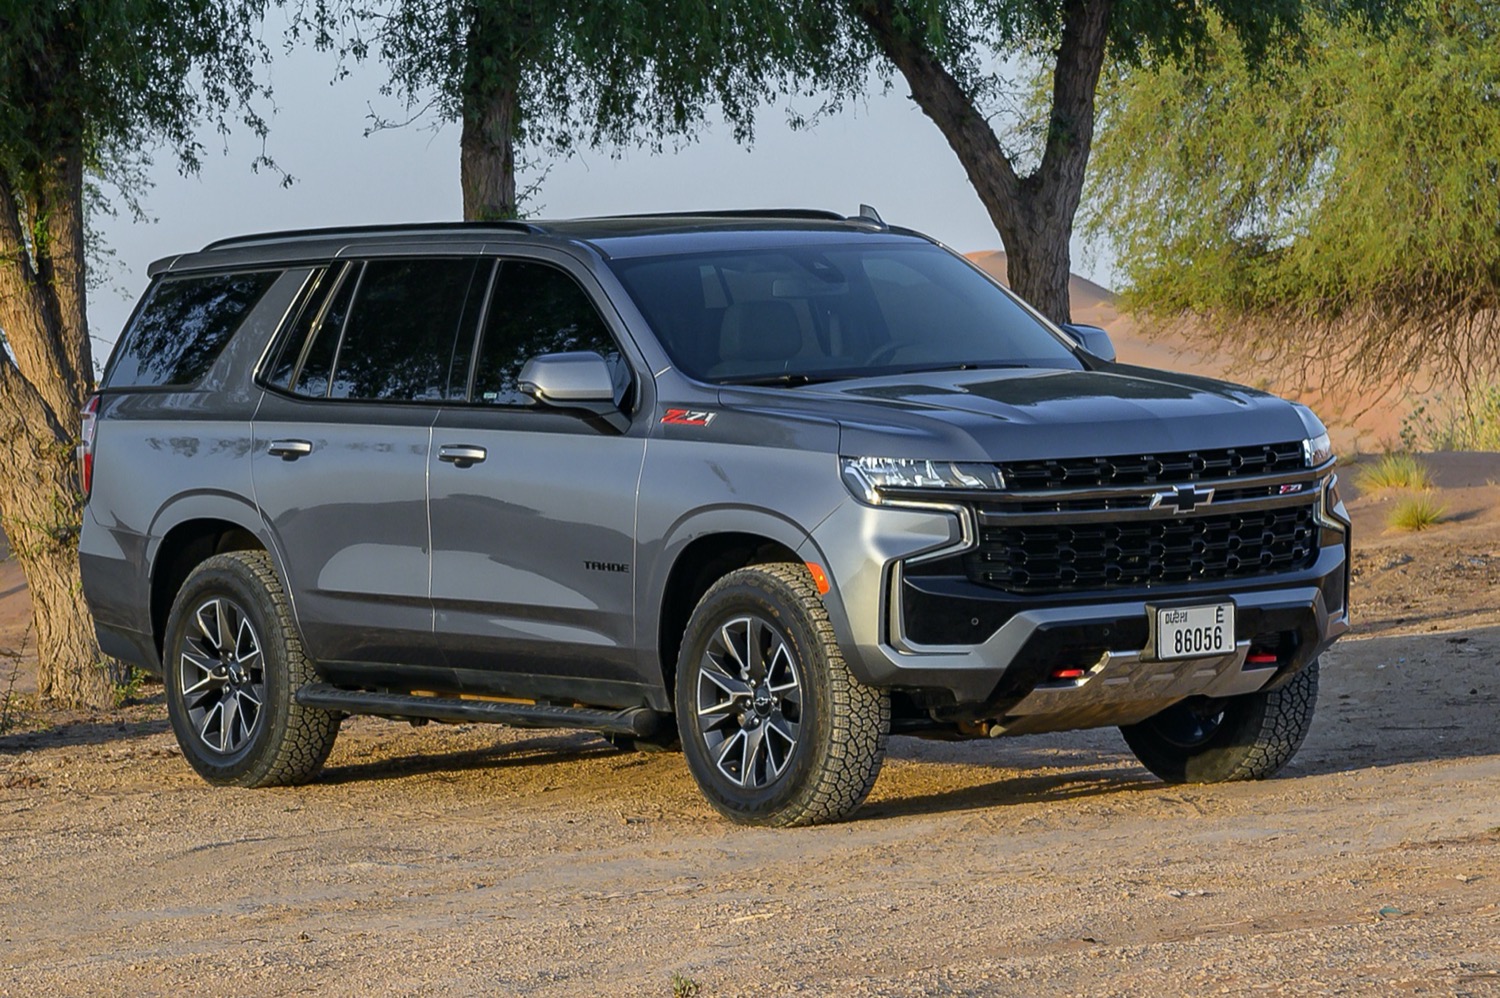 2024 Chevy Tahoe, Suburban Z71 Possible Candidates For Diesel